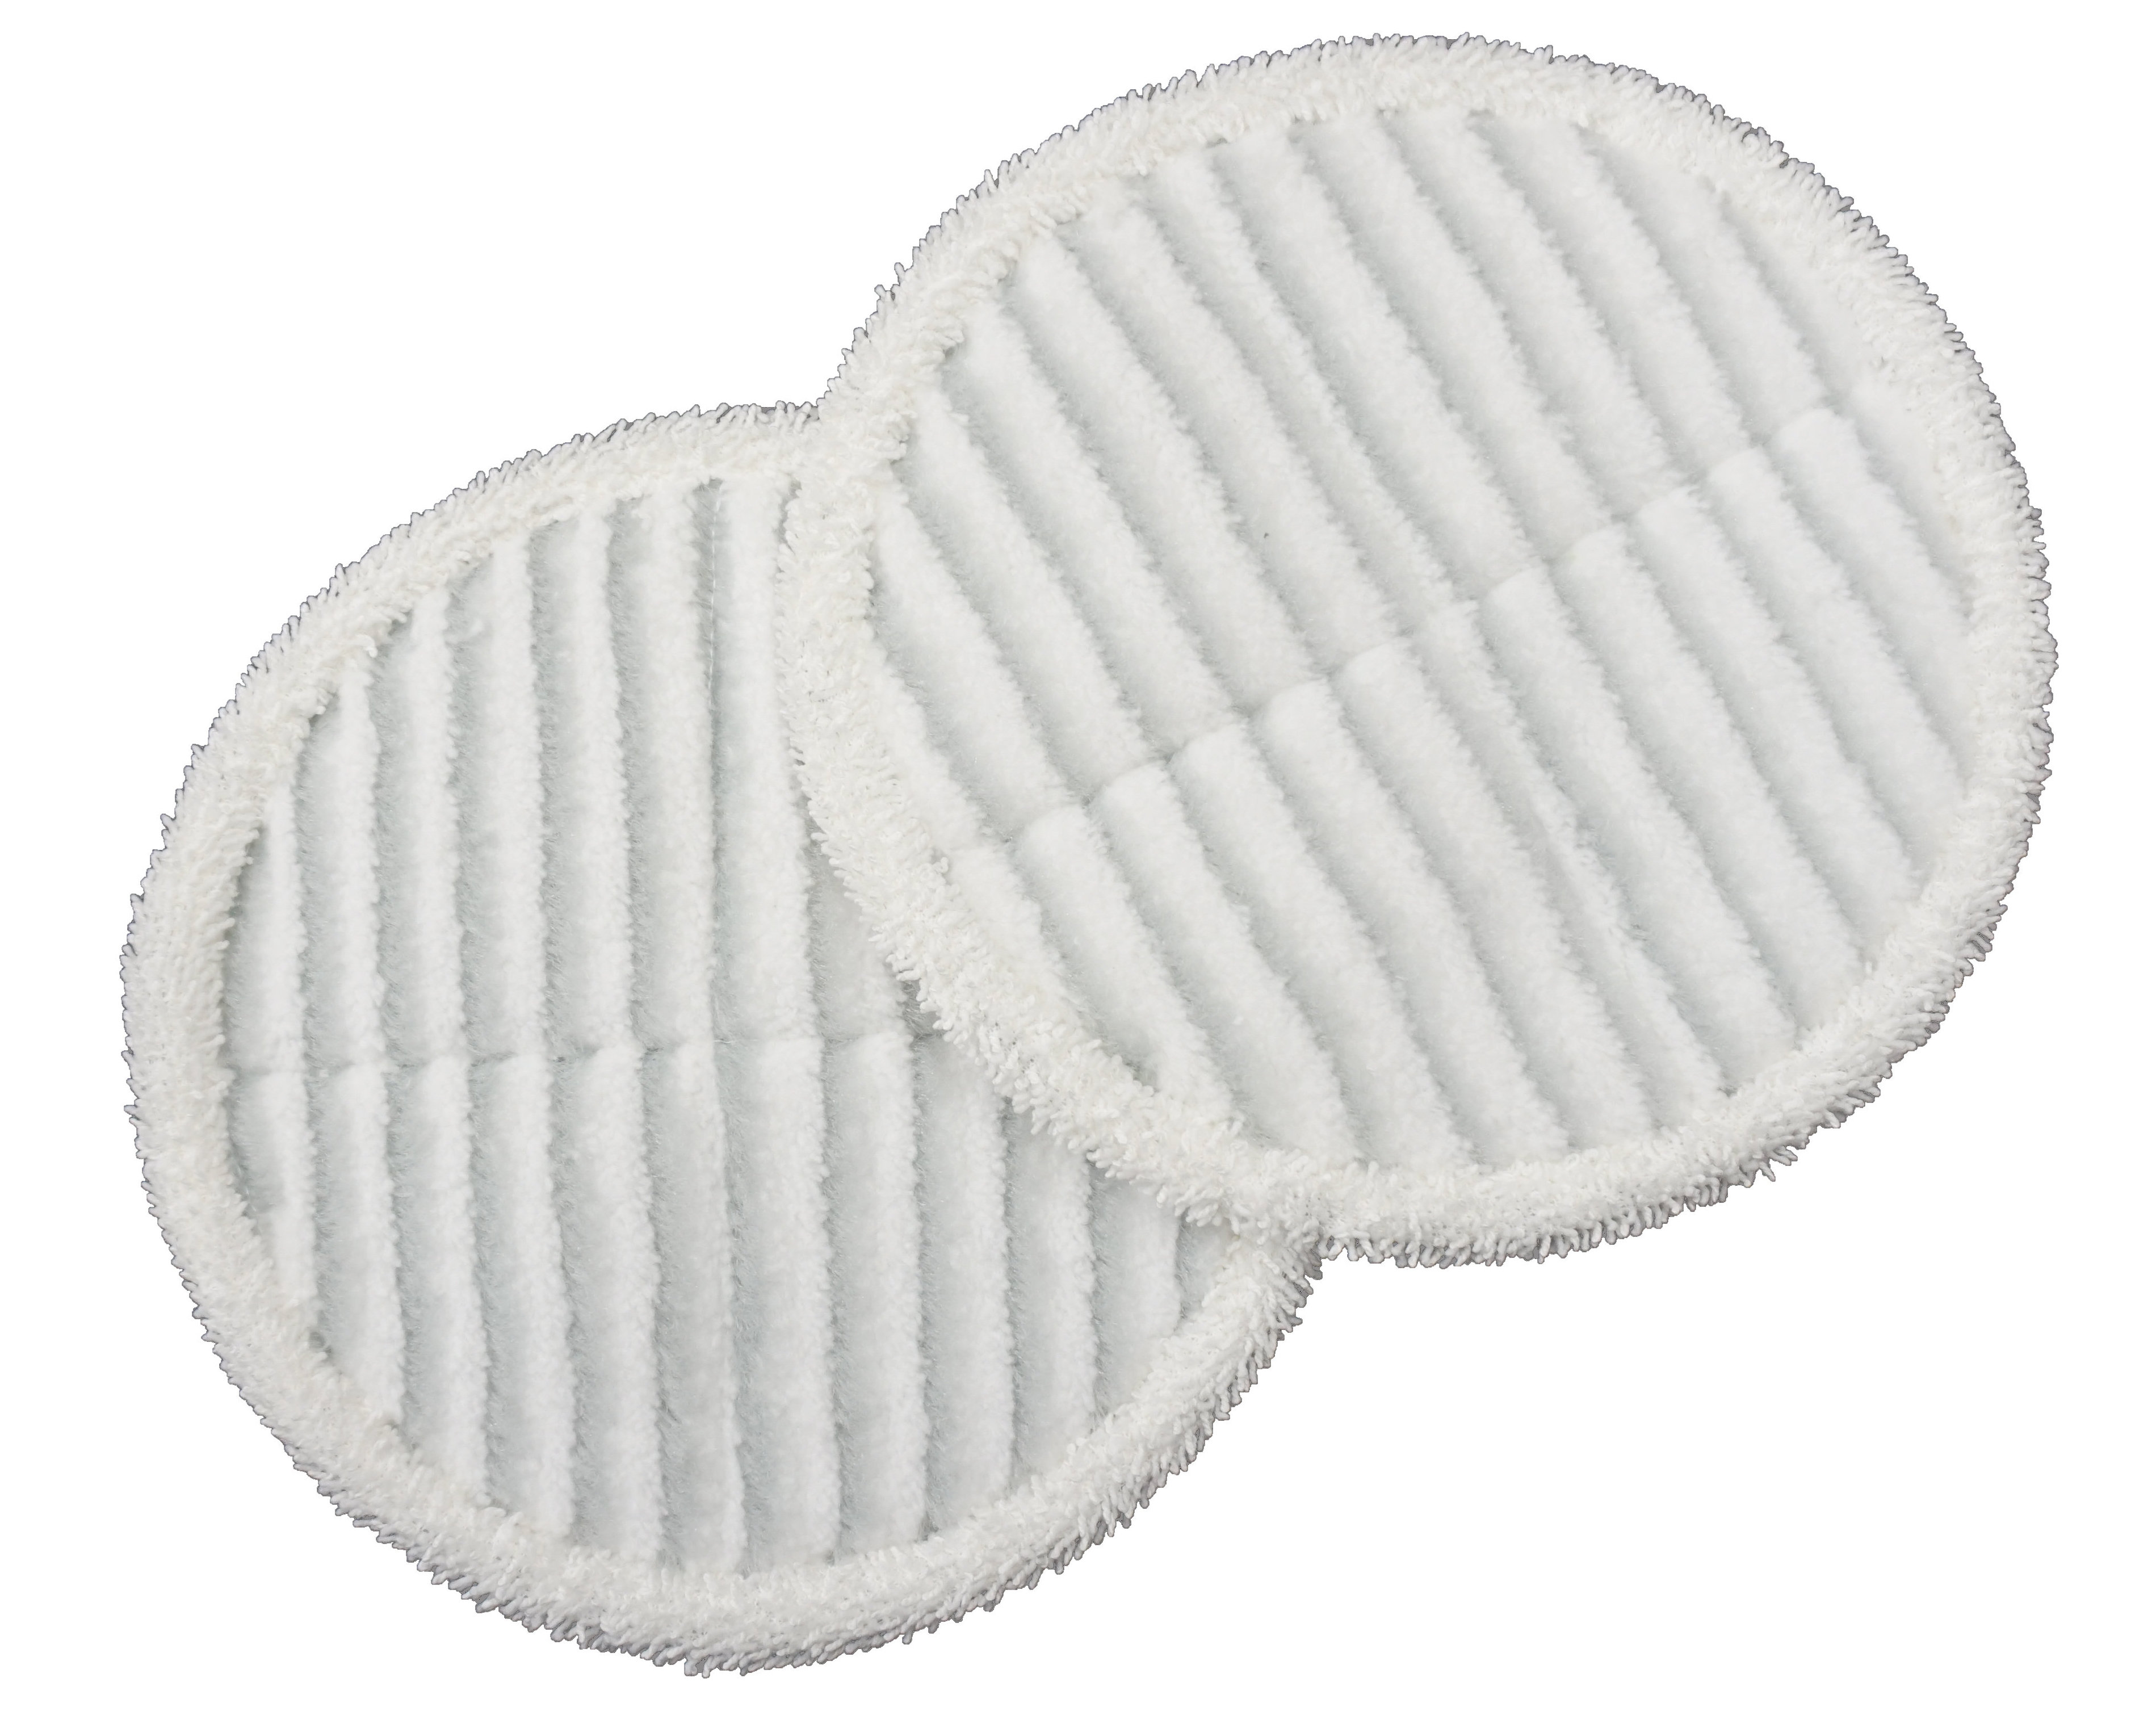 Bissell Scrubby Mop Pads, 2 Pk, for Spinwave Hard Floor Spin Mop, 1611298 - image 1 of 2